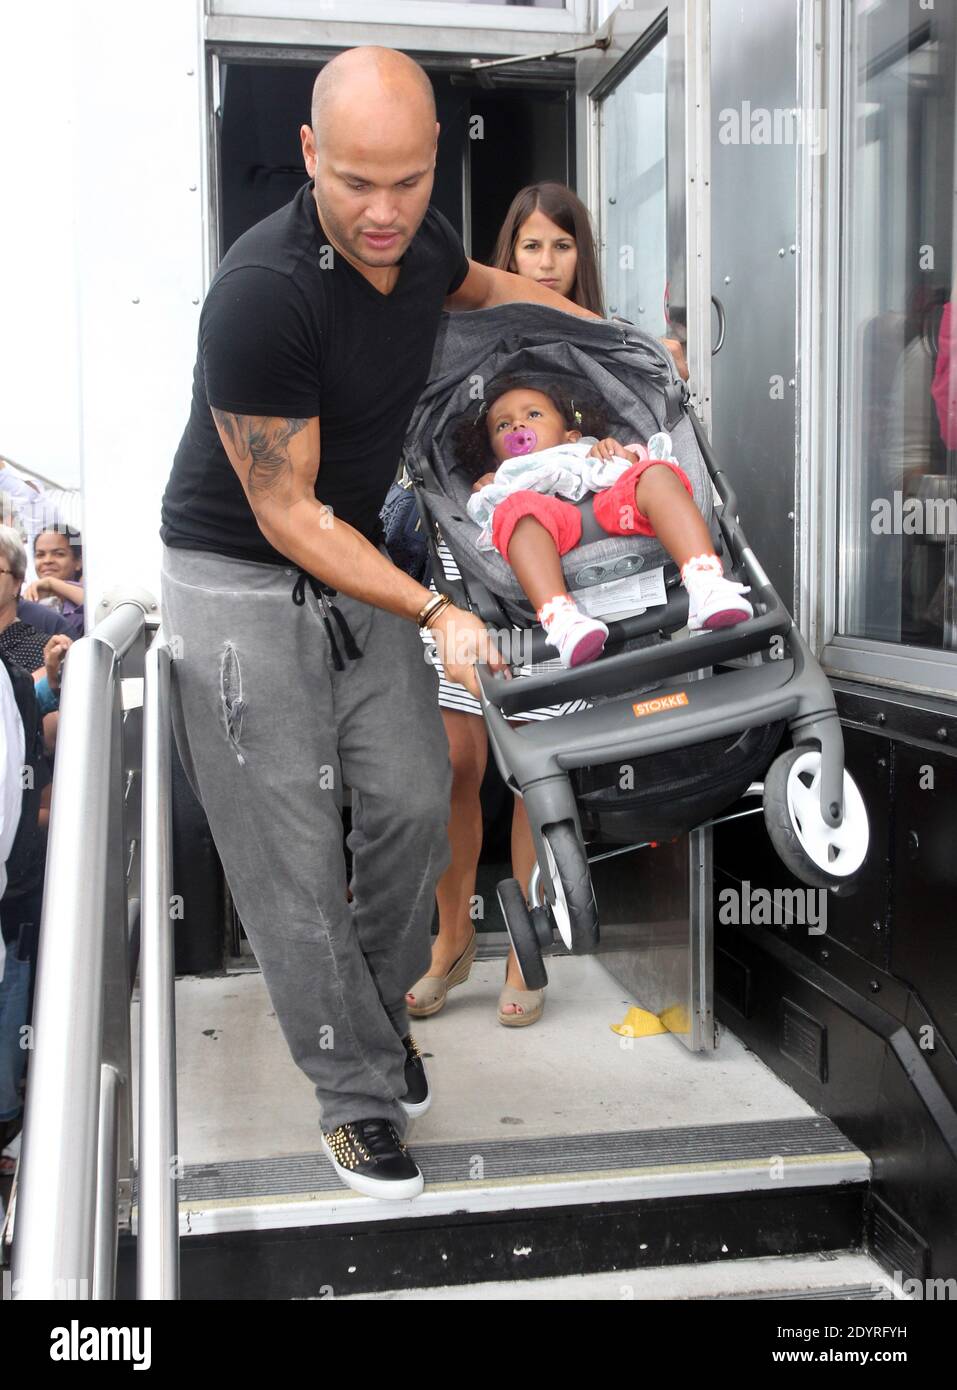 Please hide children's faces prior to the publication - British singer Mel B at the Empire State Building with her husband Stephen Belafonte and children to promote the live show 'America's Got Talent' in New York City, NY, USA on July 25, 2013. Photo by Charles Guerin/ABACAPRESS.COM Stock Photo